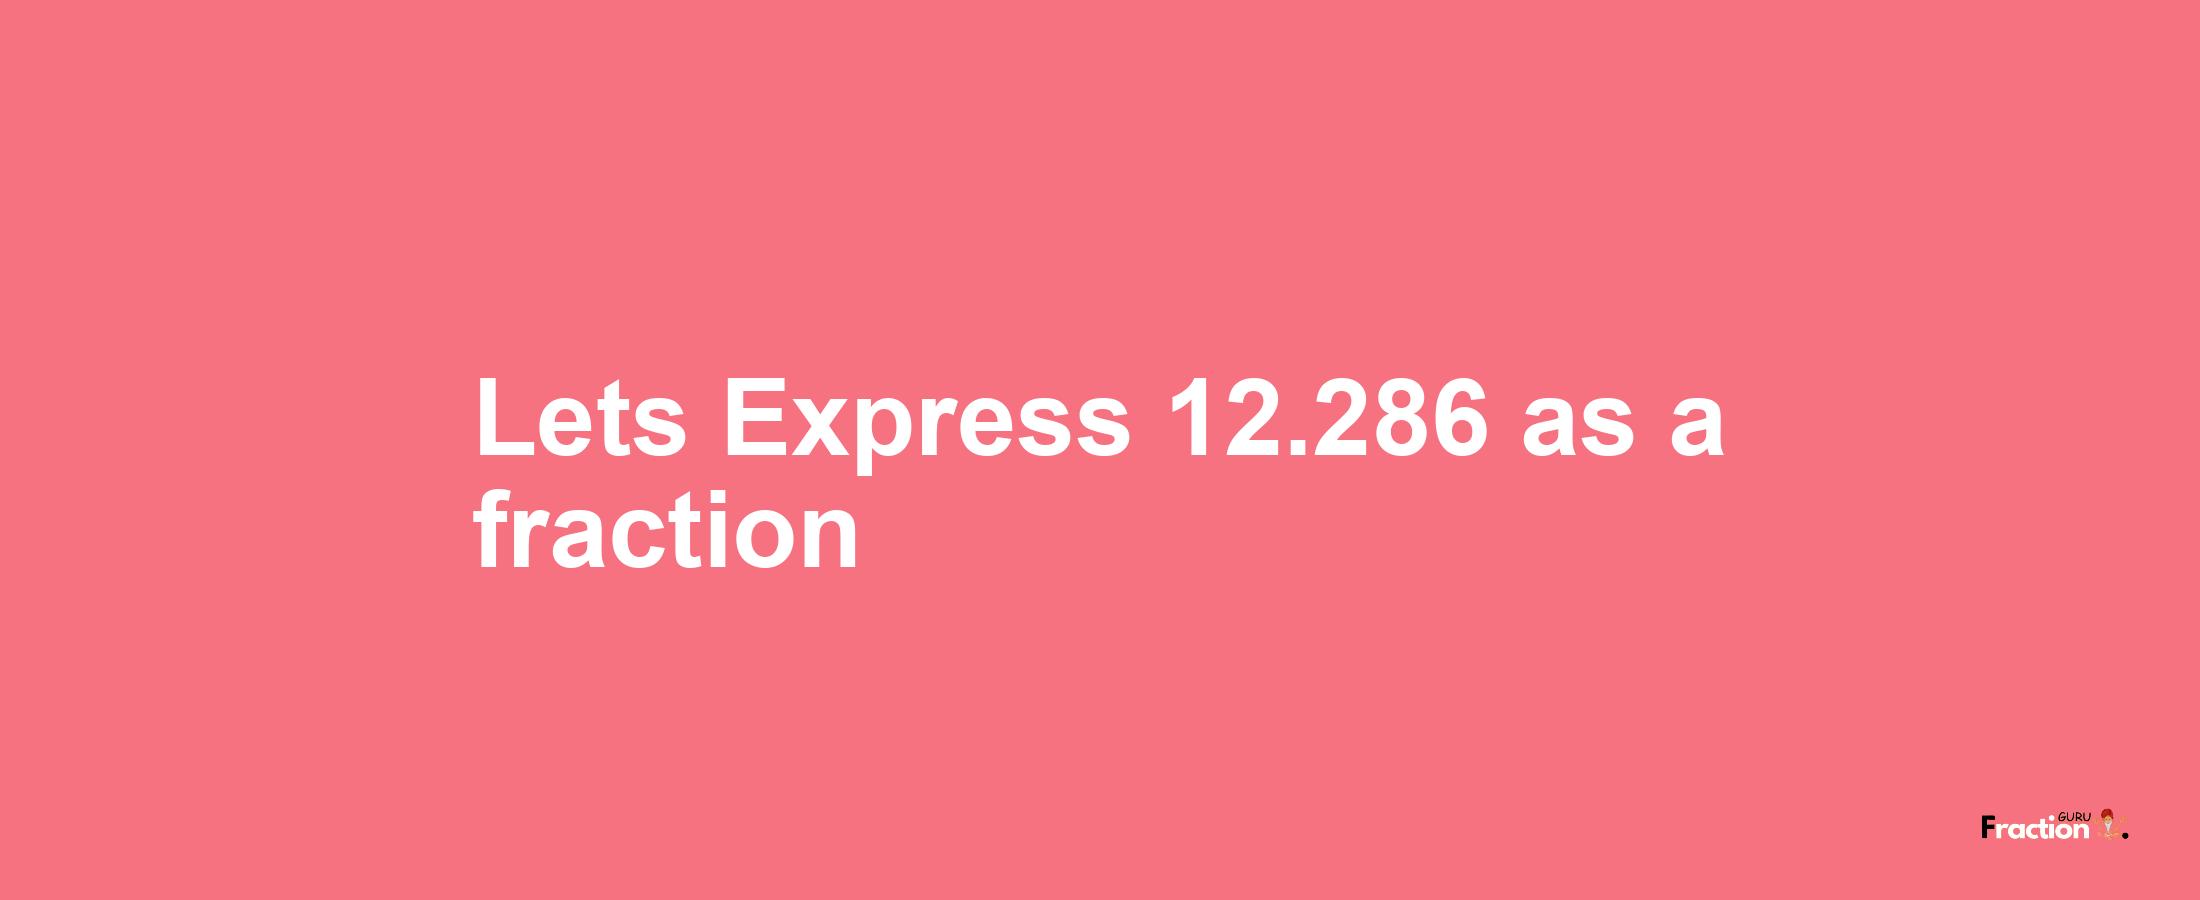 Lets Express 12.286 as afraction